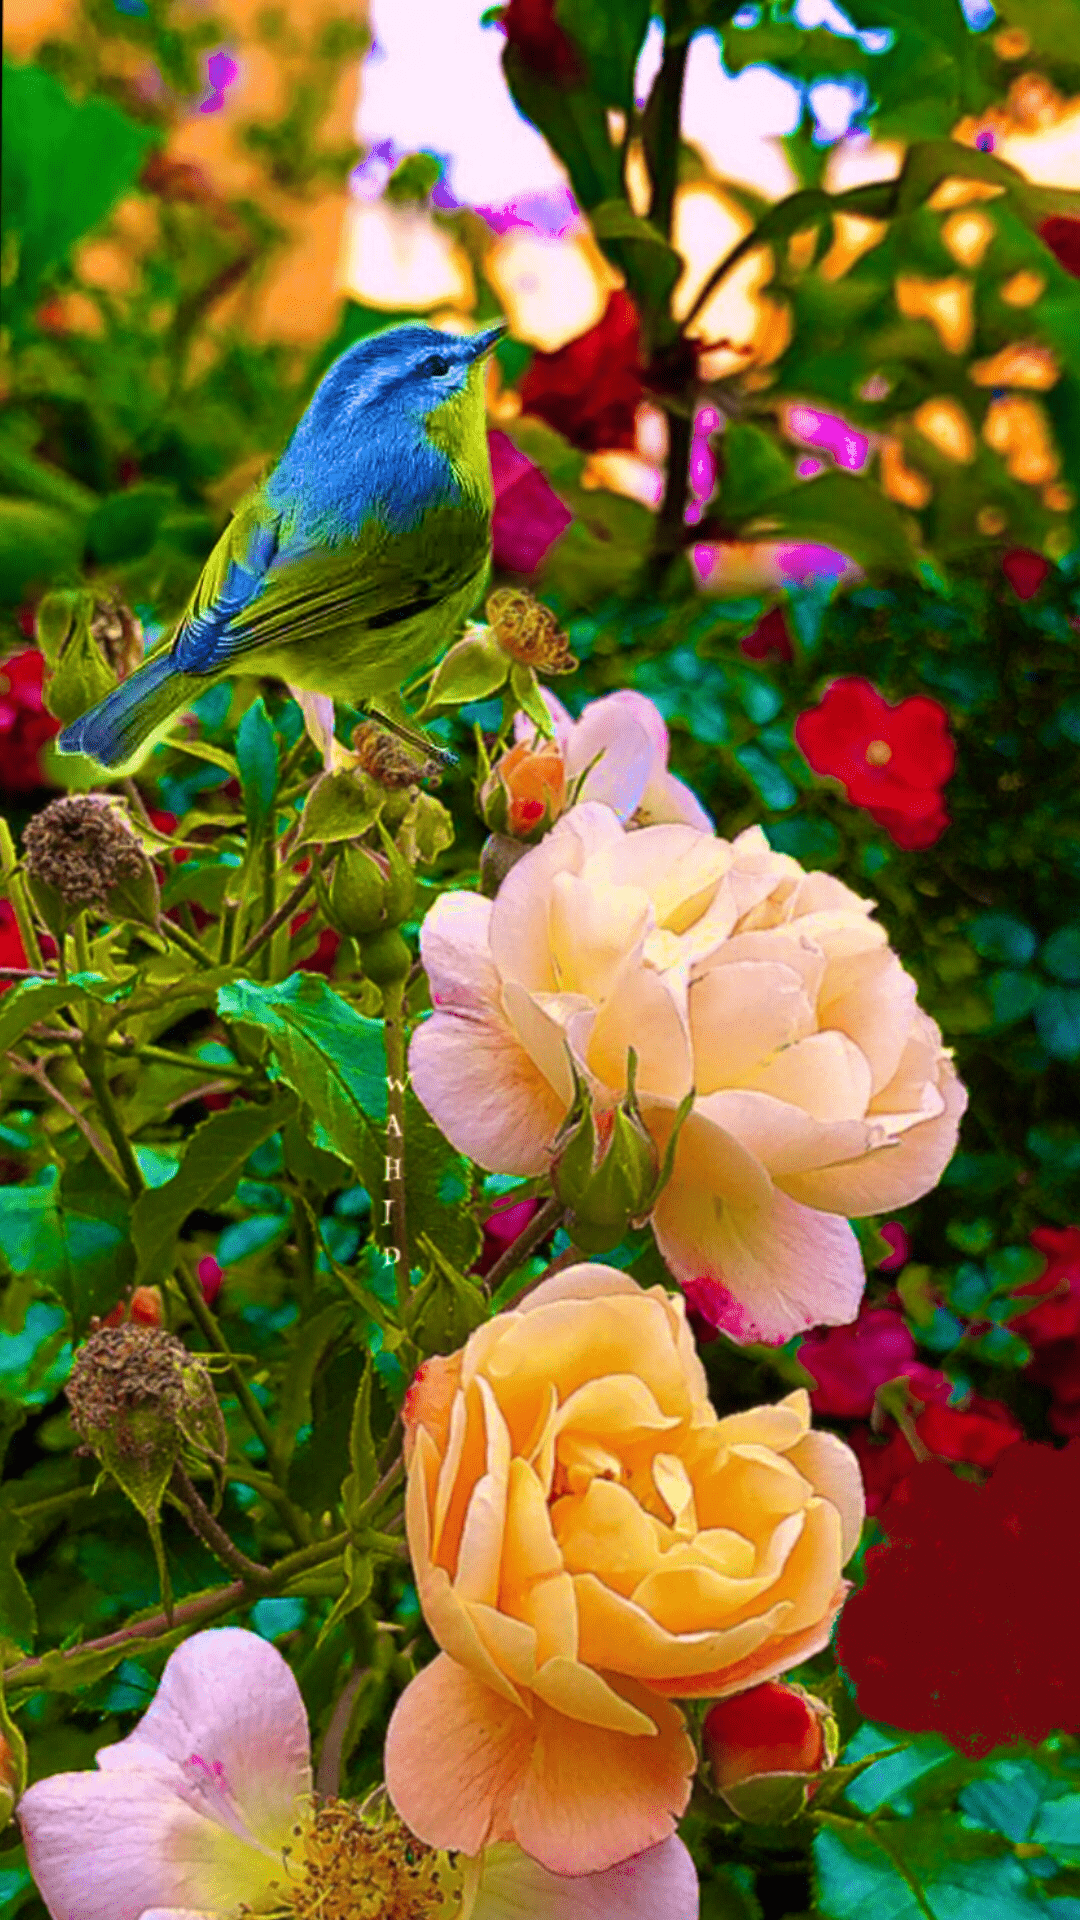 Birds and Roses Wallpaper for Phone 1080x1920